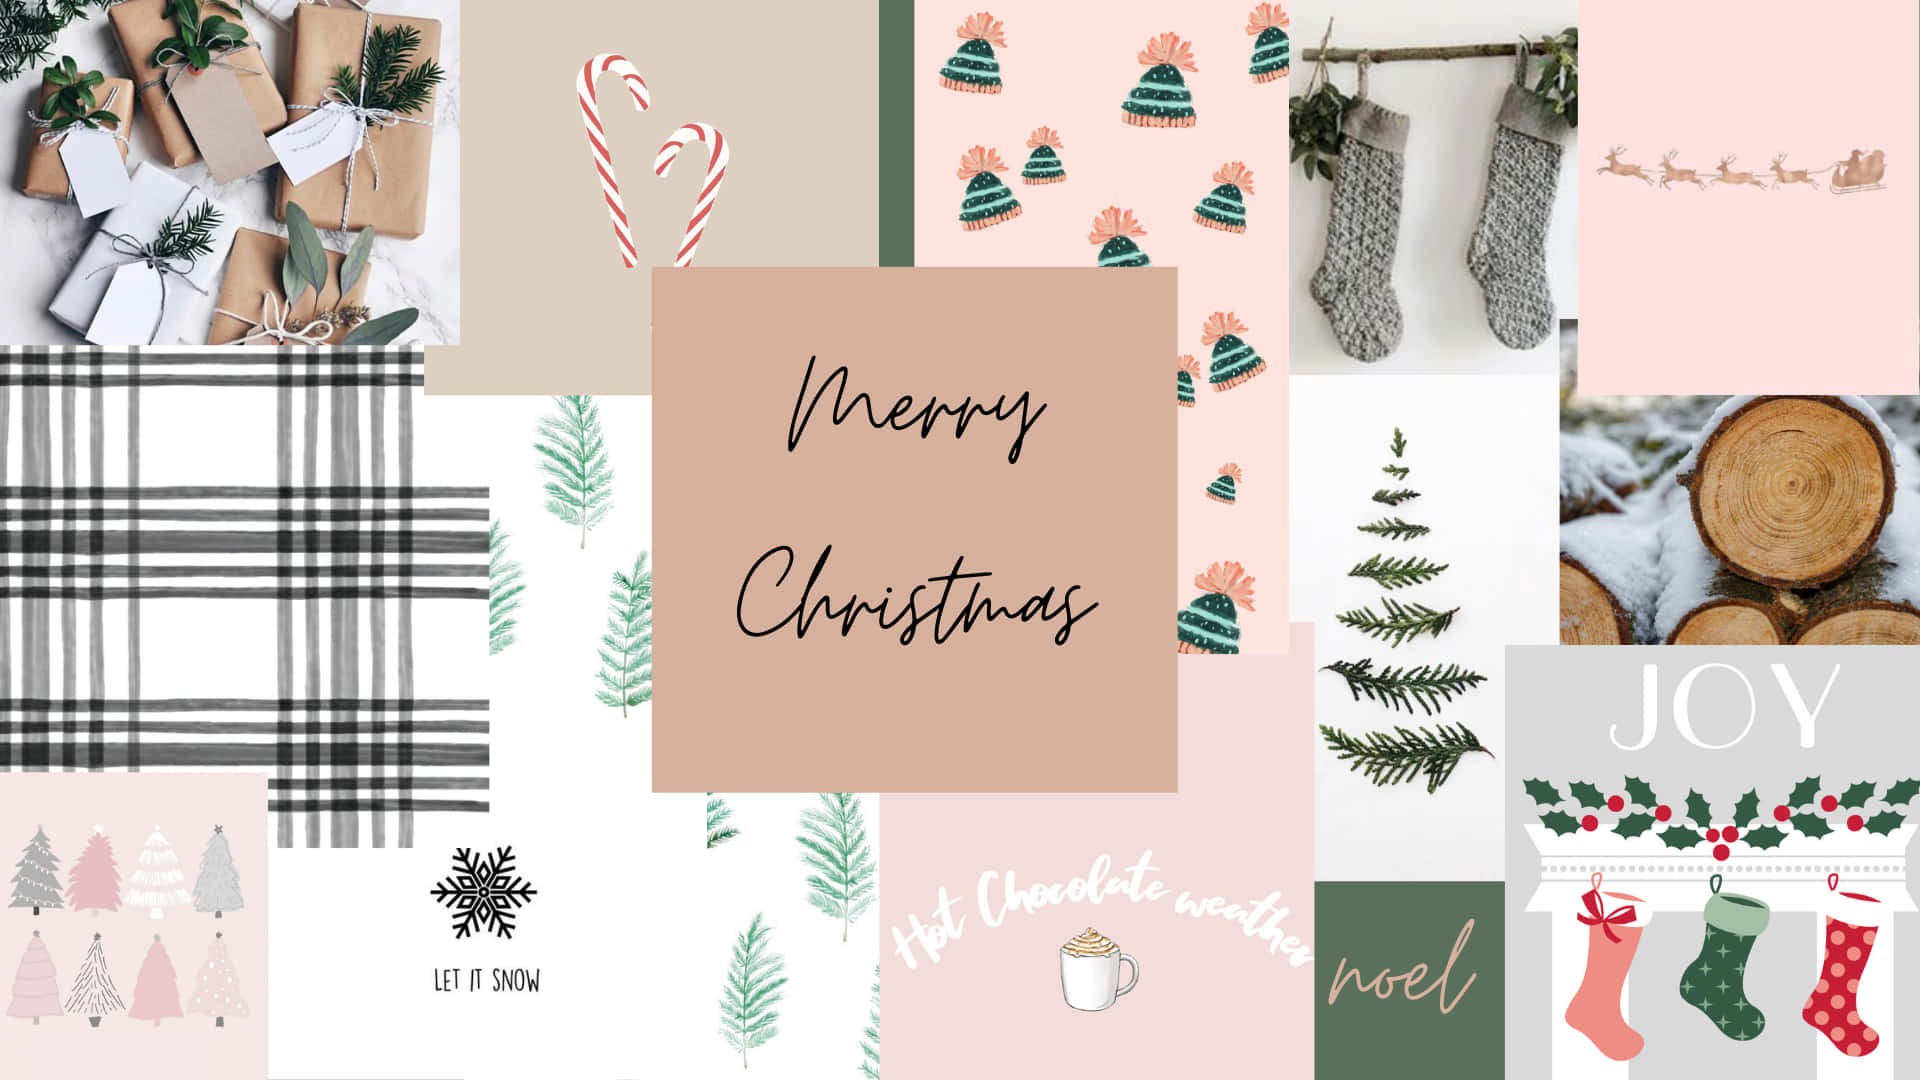 Get into the Christmas spirit with a festive Mac aesthetic wallpaper Wallpaper